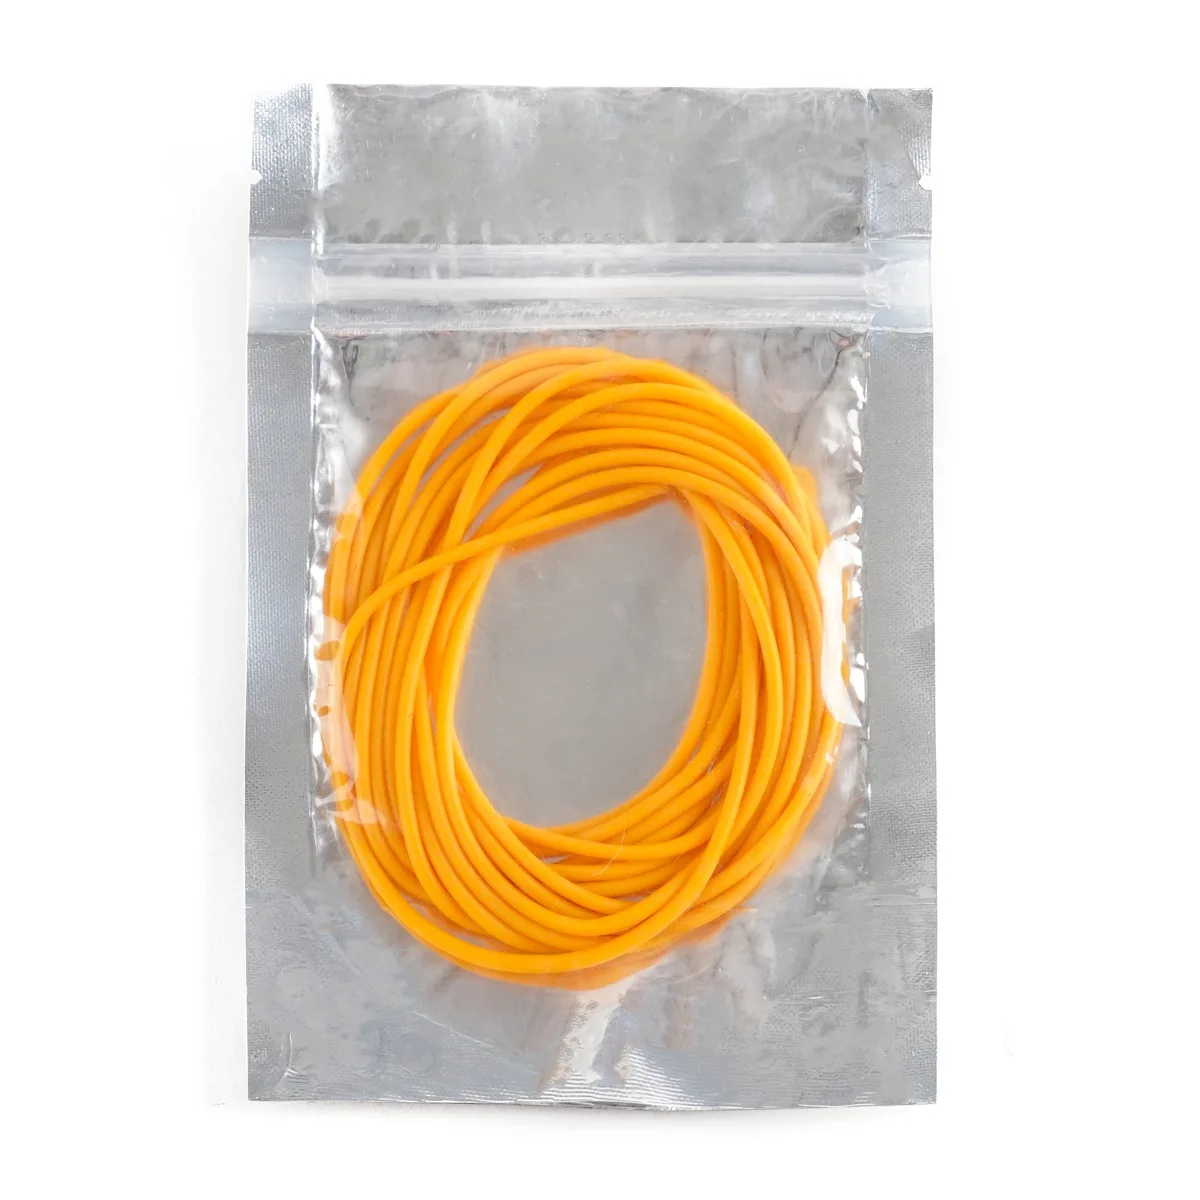 New 3m/6m Orange Hollow Pole Elastic Inner Outer Diameter 0.7-2.2mm Fishing Lines Retention Rope Latex Tube Fishing Tackles